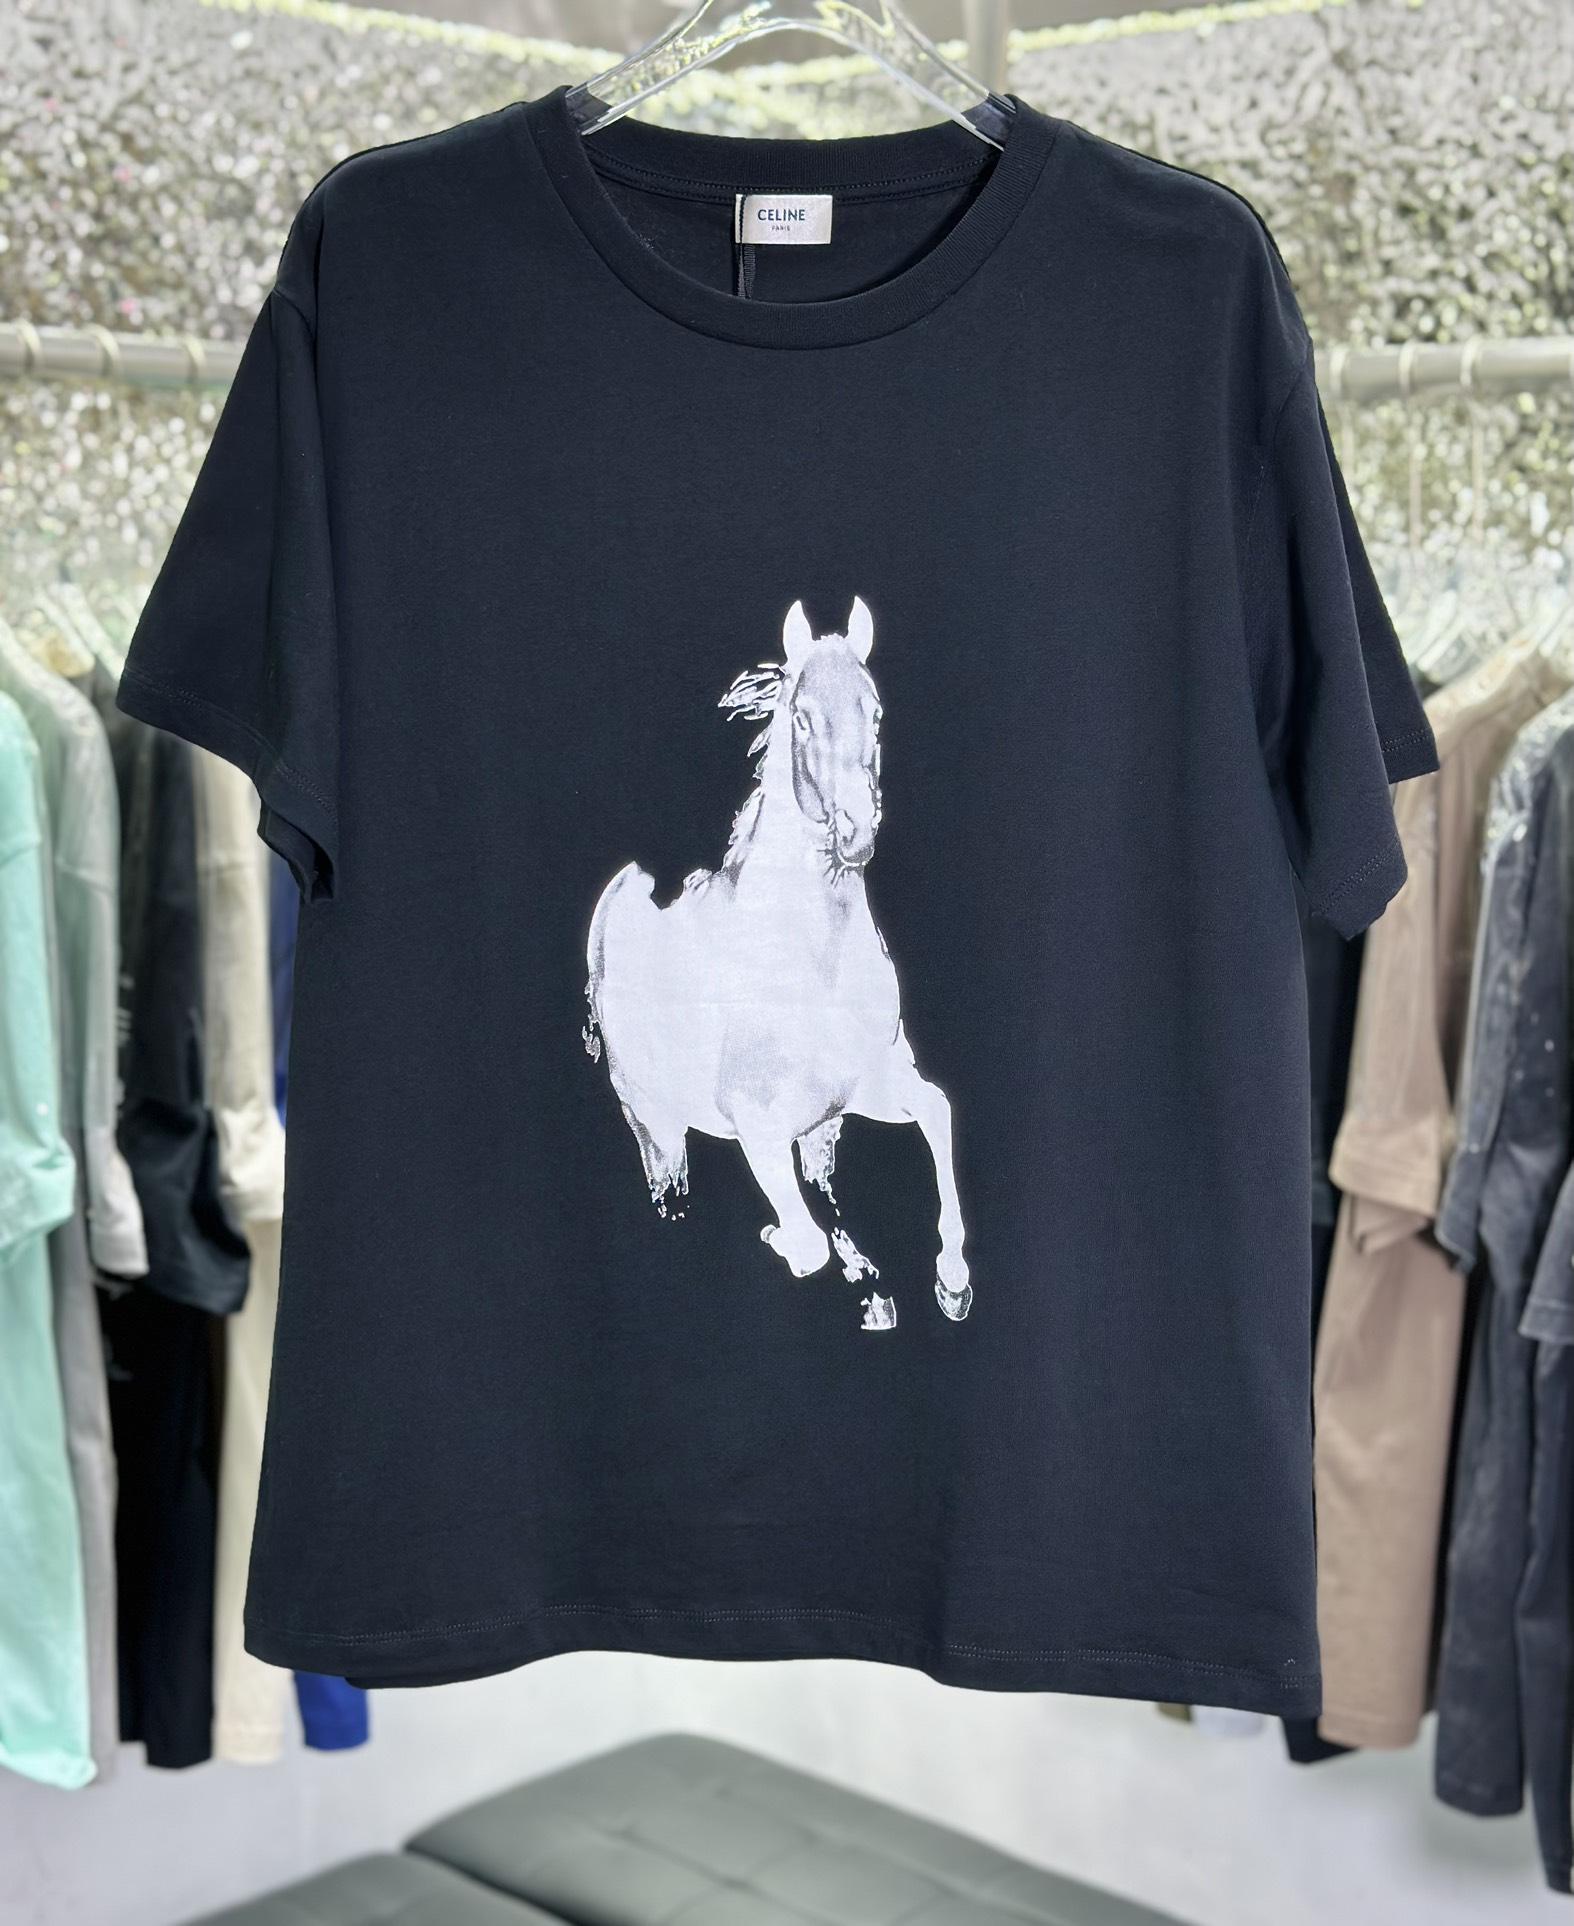 loose-horse-t-shirt-in-cotton-jersey-5965_16845011432-1000